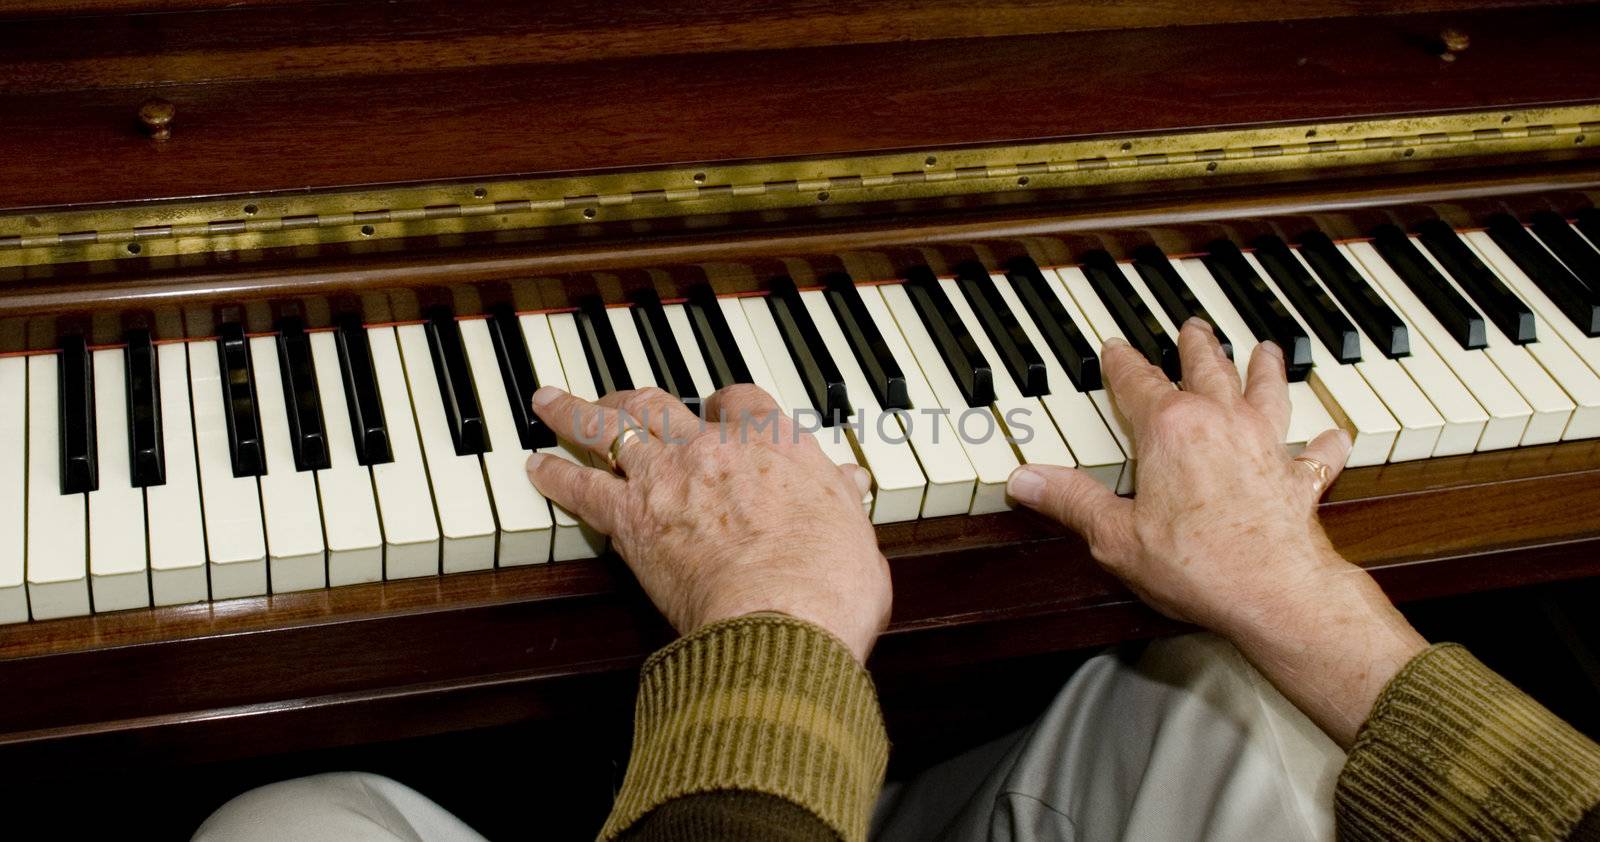 Rear flash, showing slight movement on the hands on the piano.